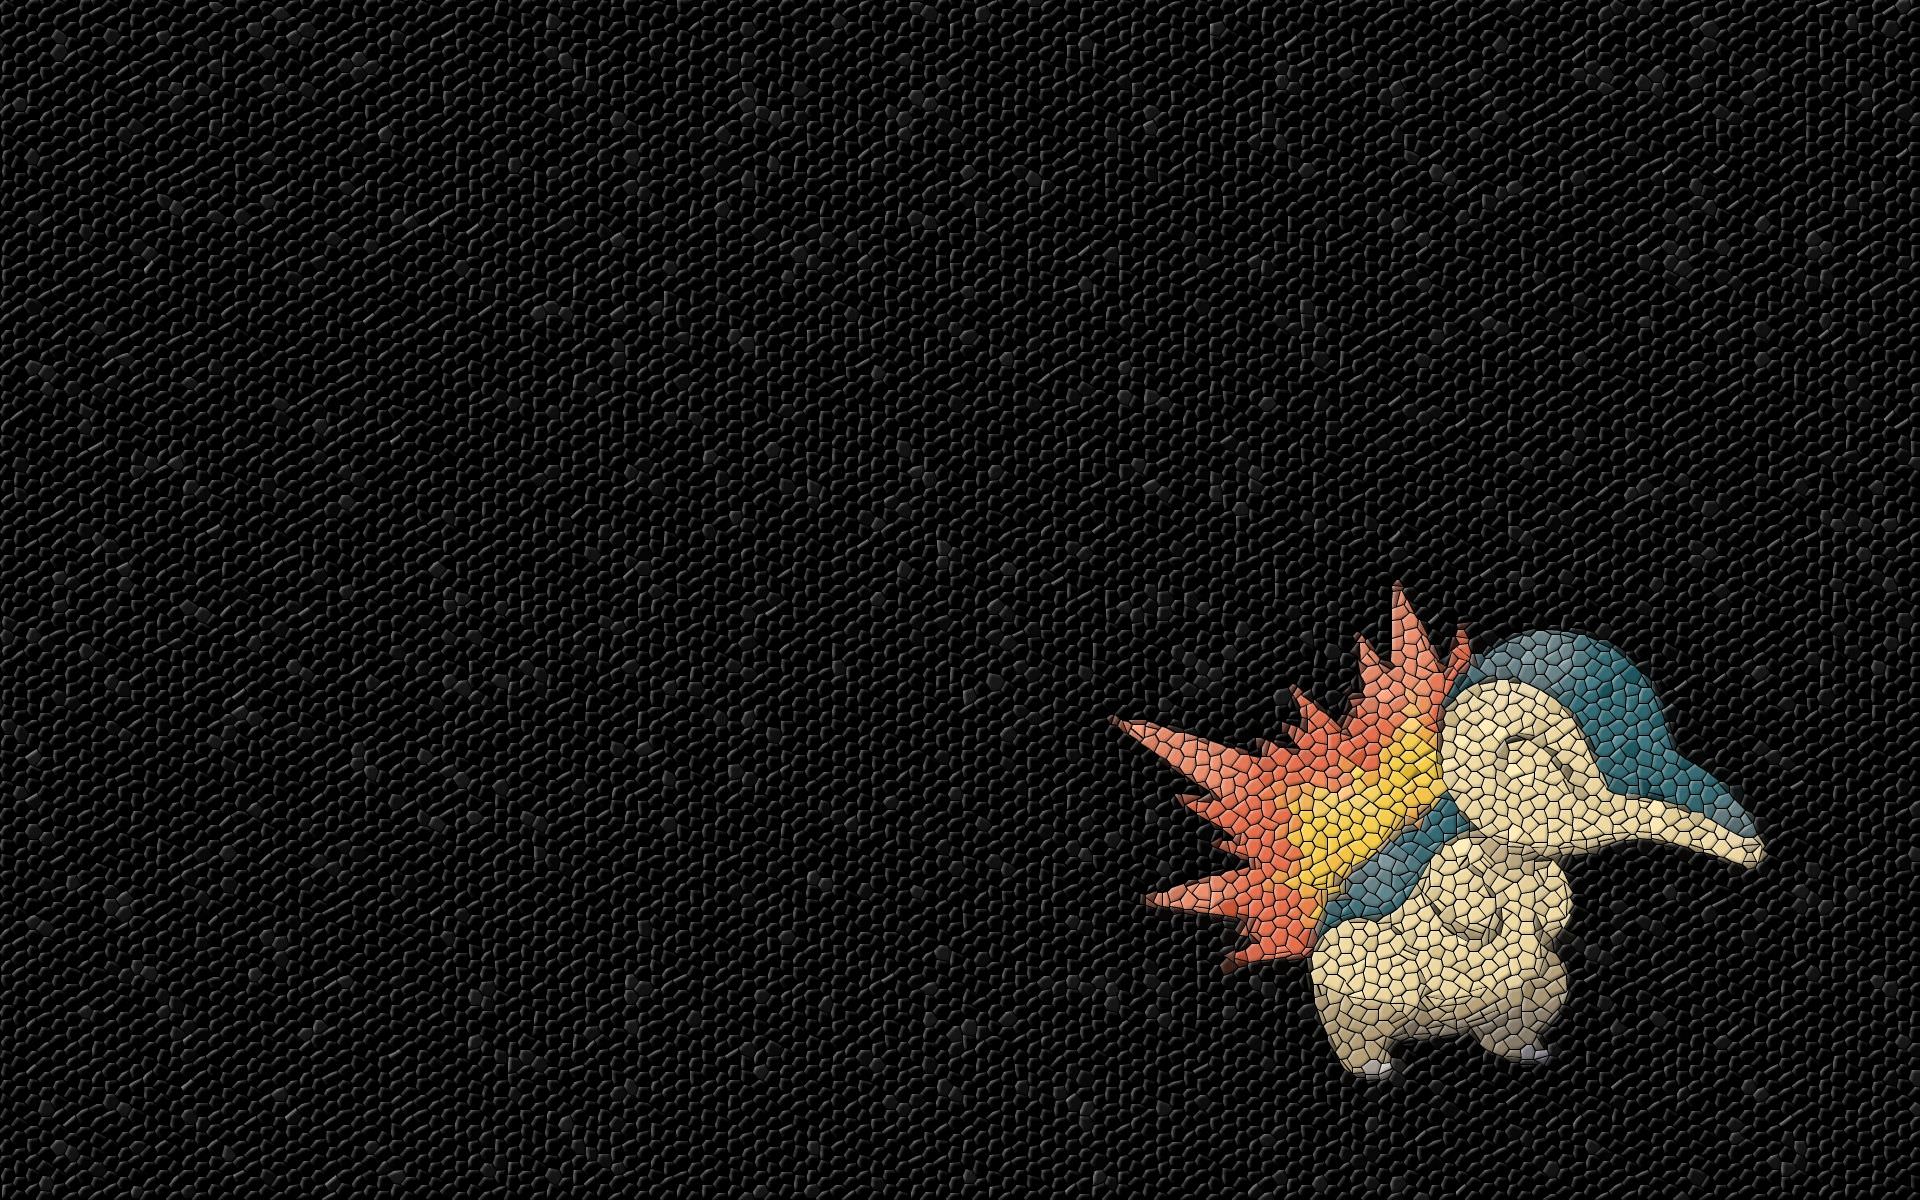 Cyndaquil Wallpaper by TombieFox on DeviantArt